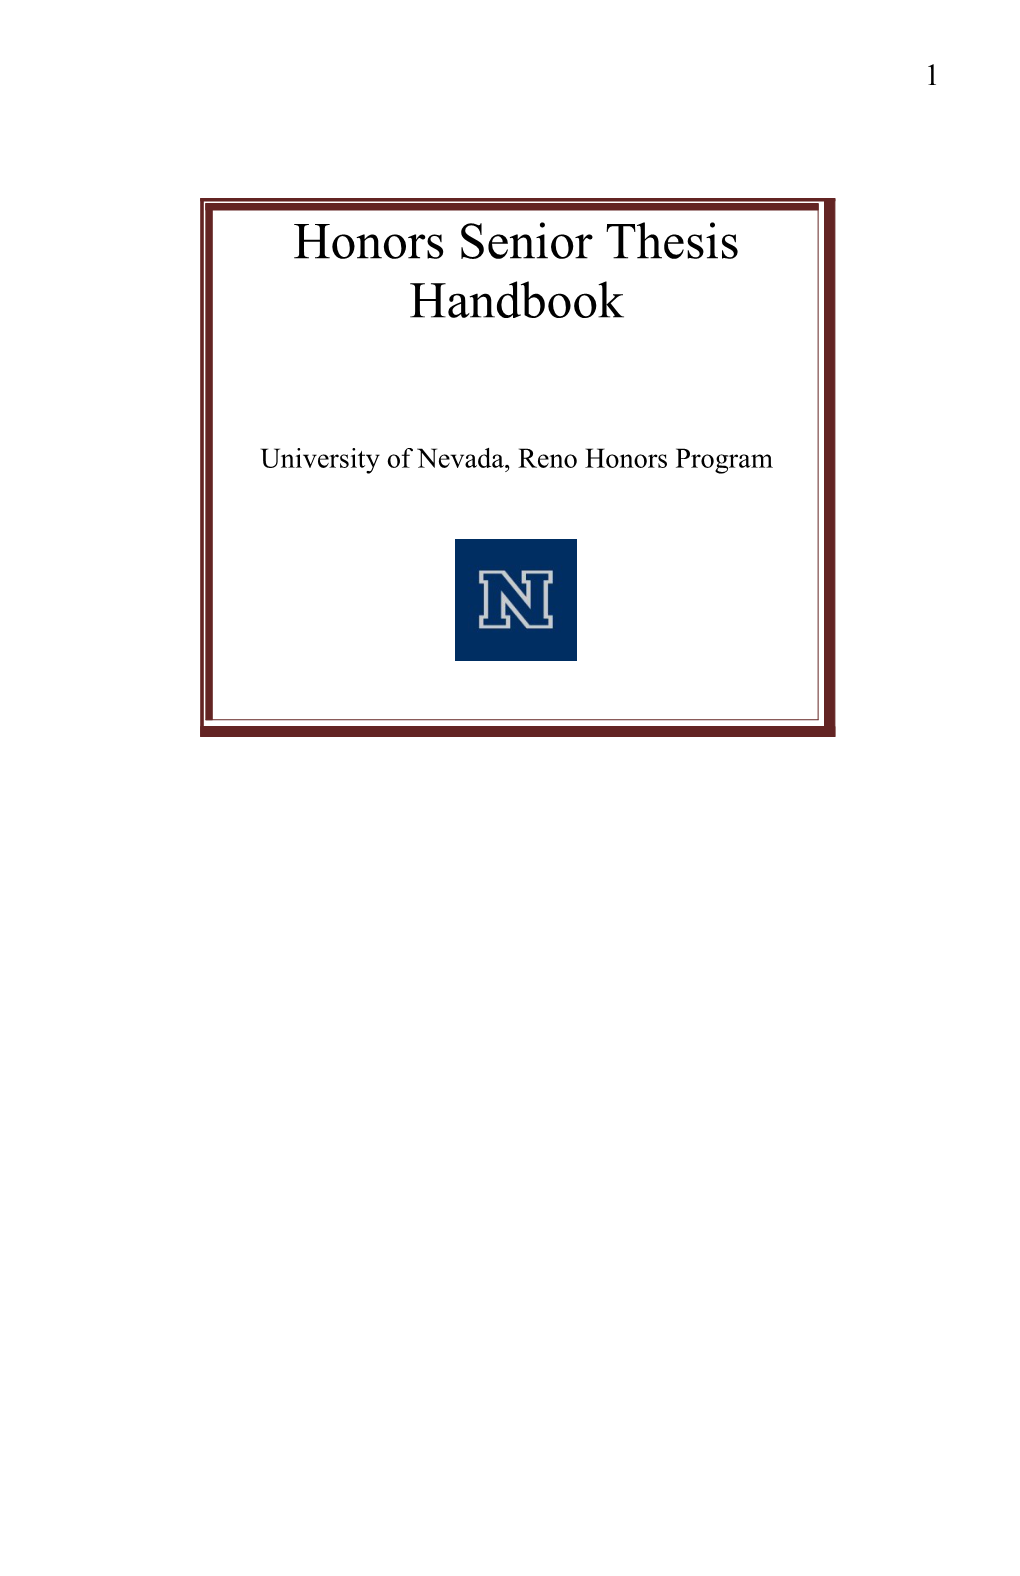 How to Use This Handbook 6